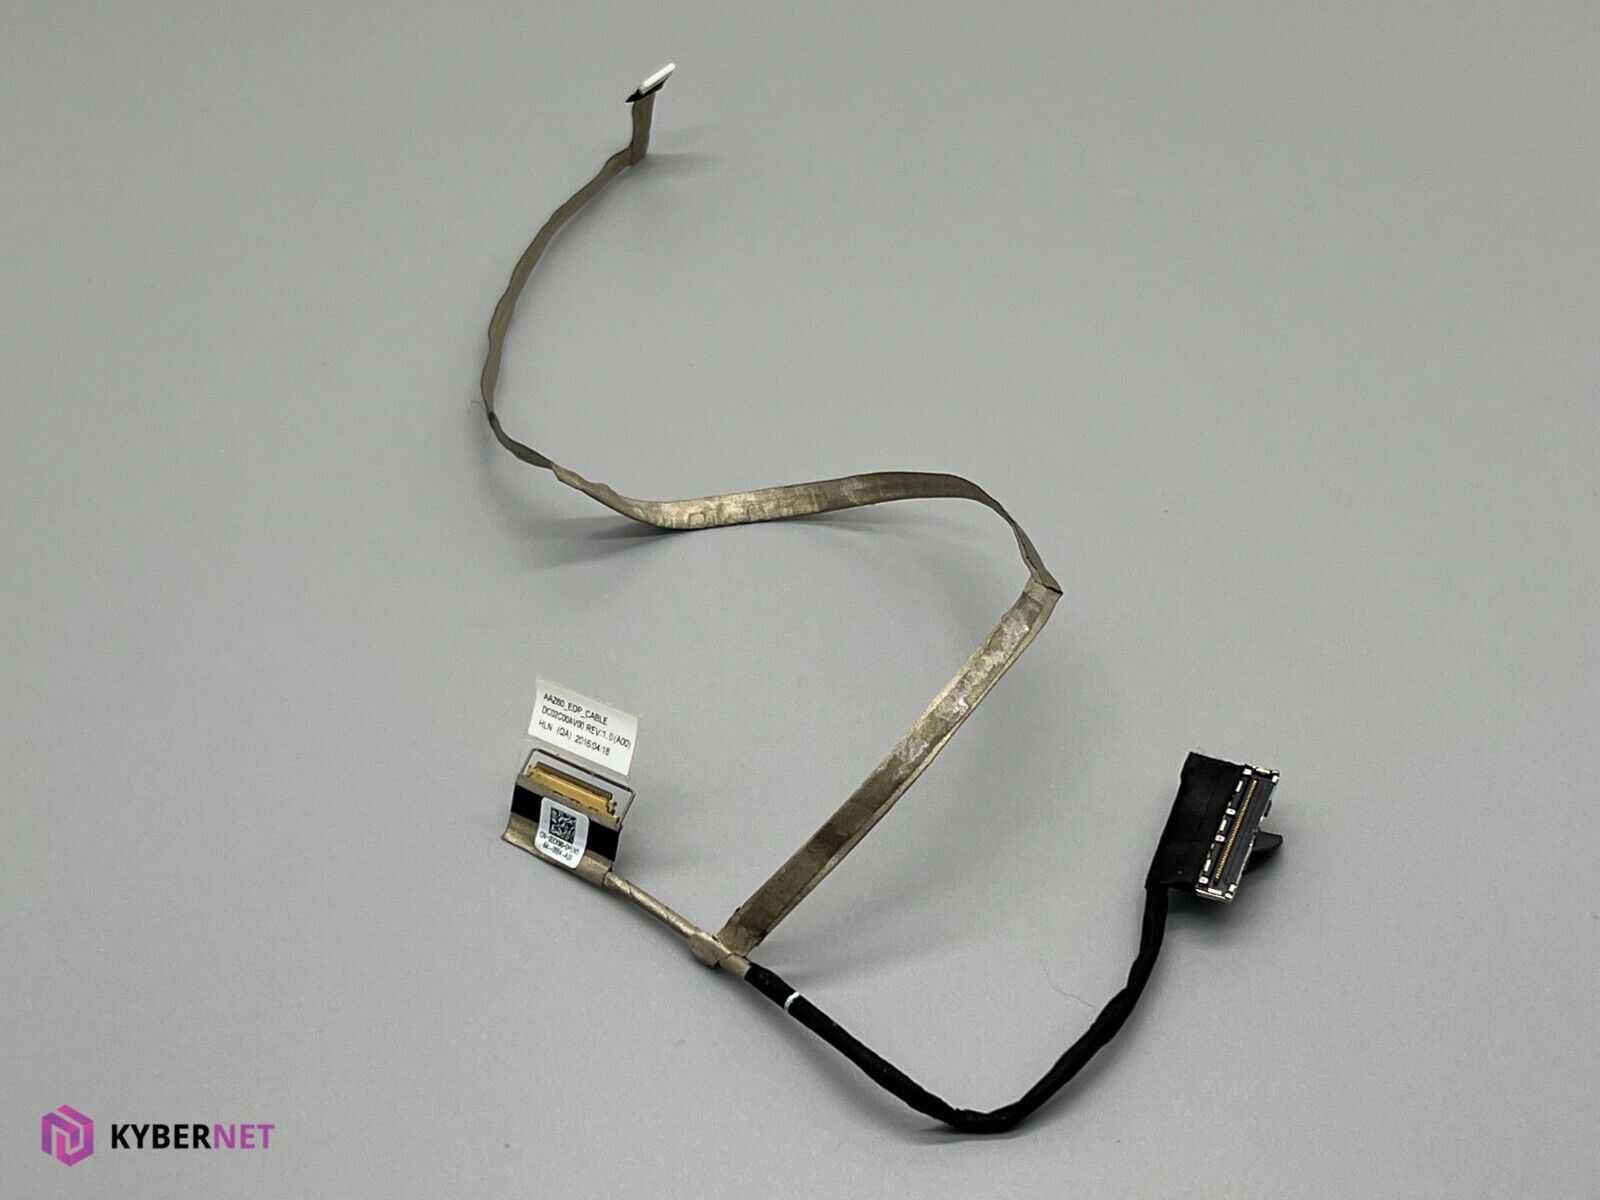 Cablu LCD Video Cable - NO TS pt laptop Dell Latit 7470 - p/n DCKM0